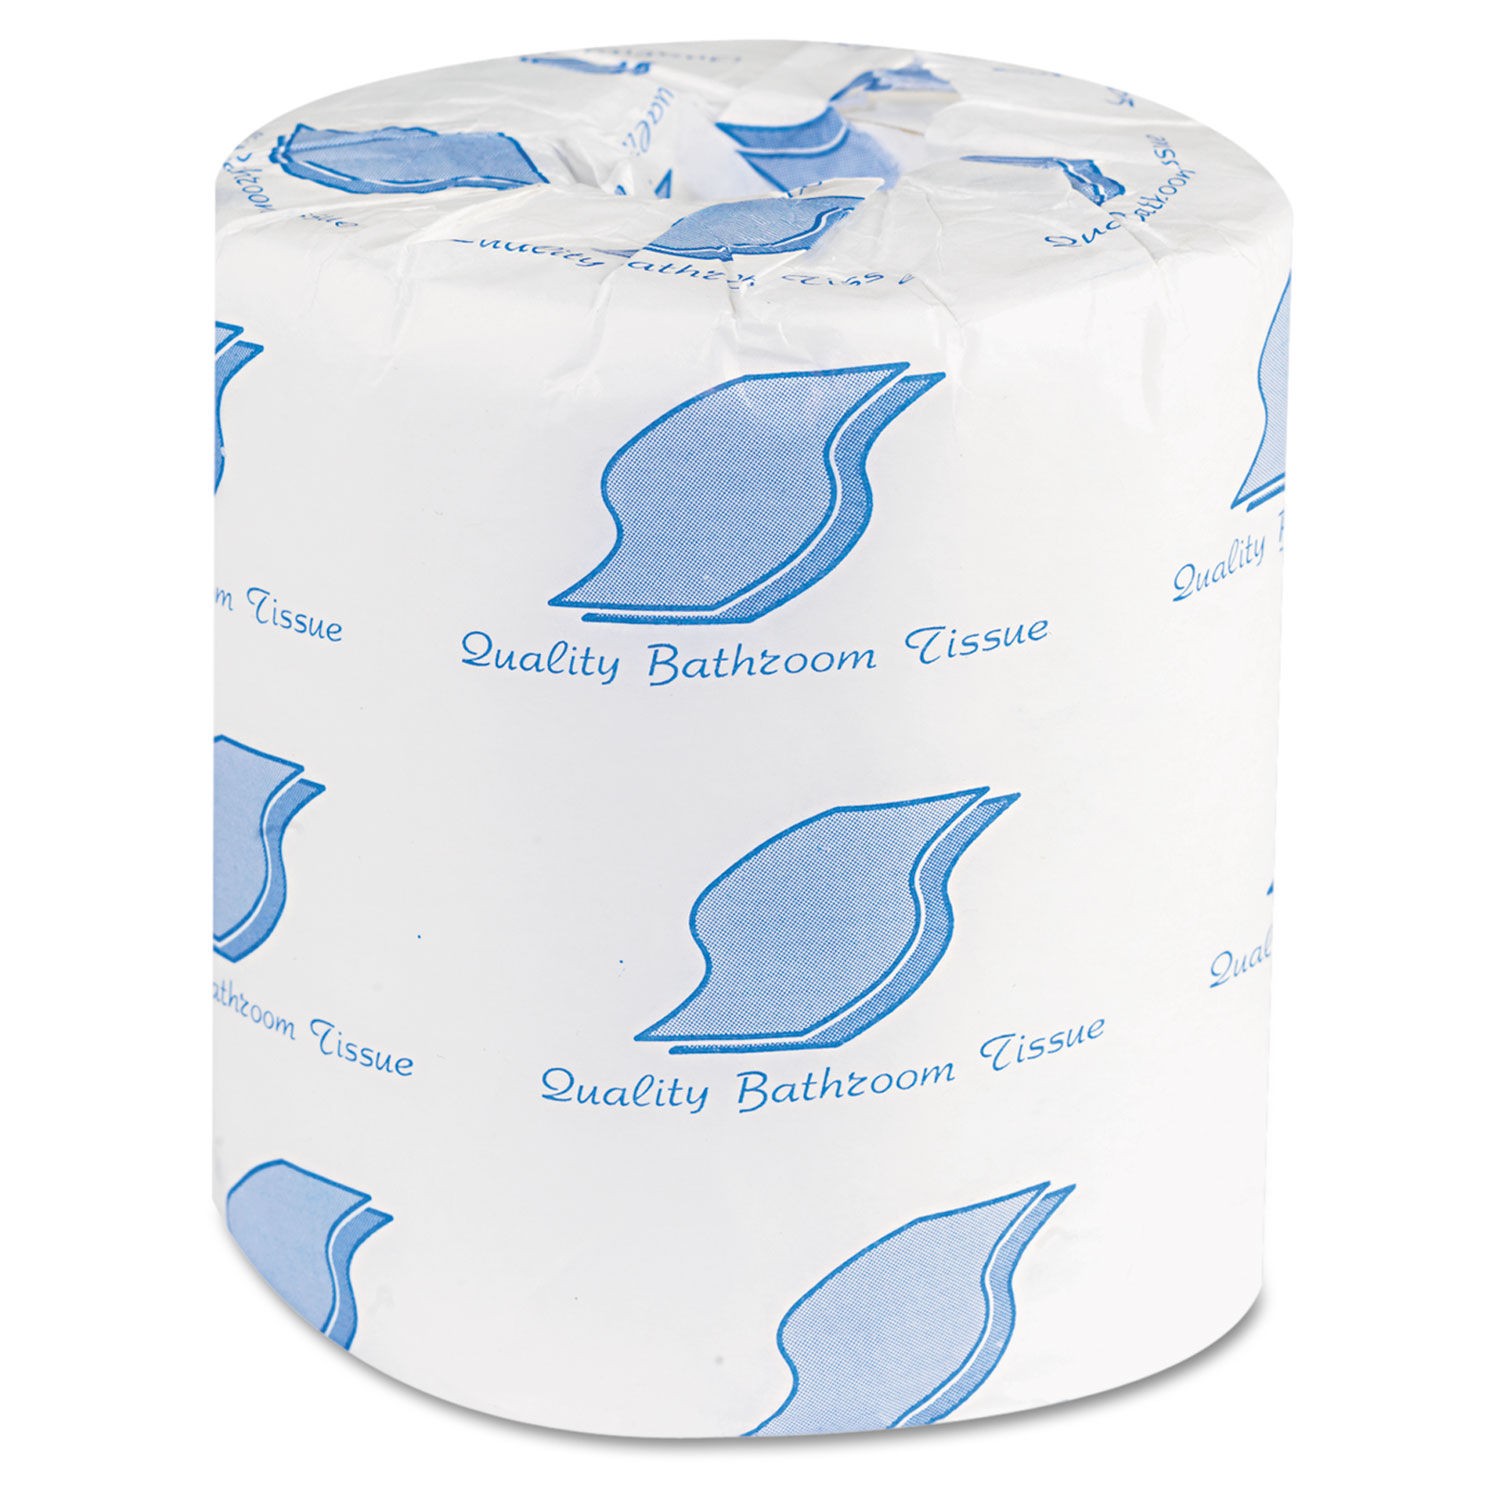 2 BOXES 2Ply White Coreless Toilet Rolls 72 rolls - 800 sheets per roll 